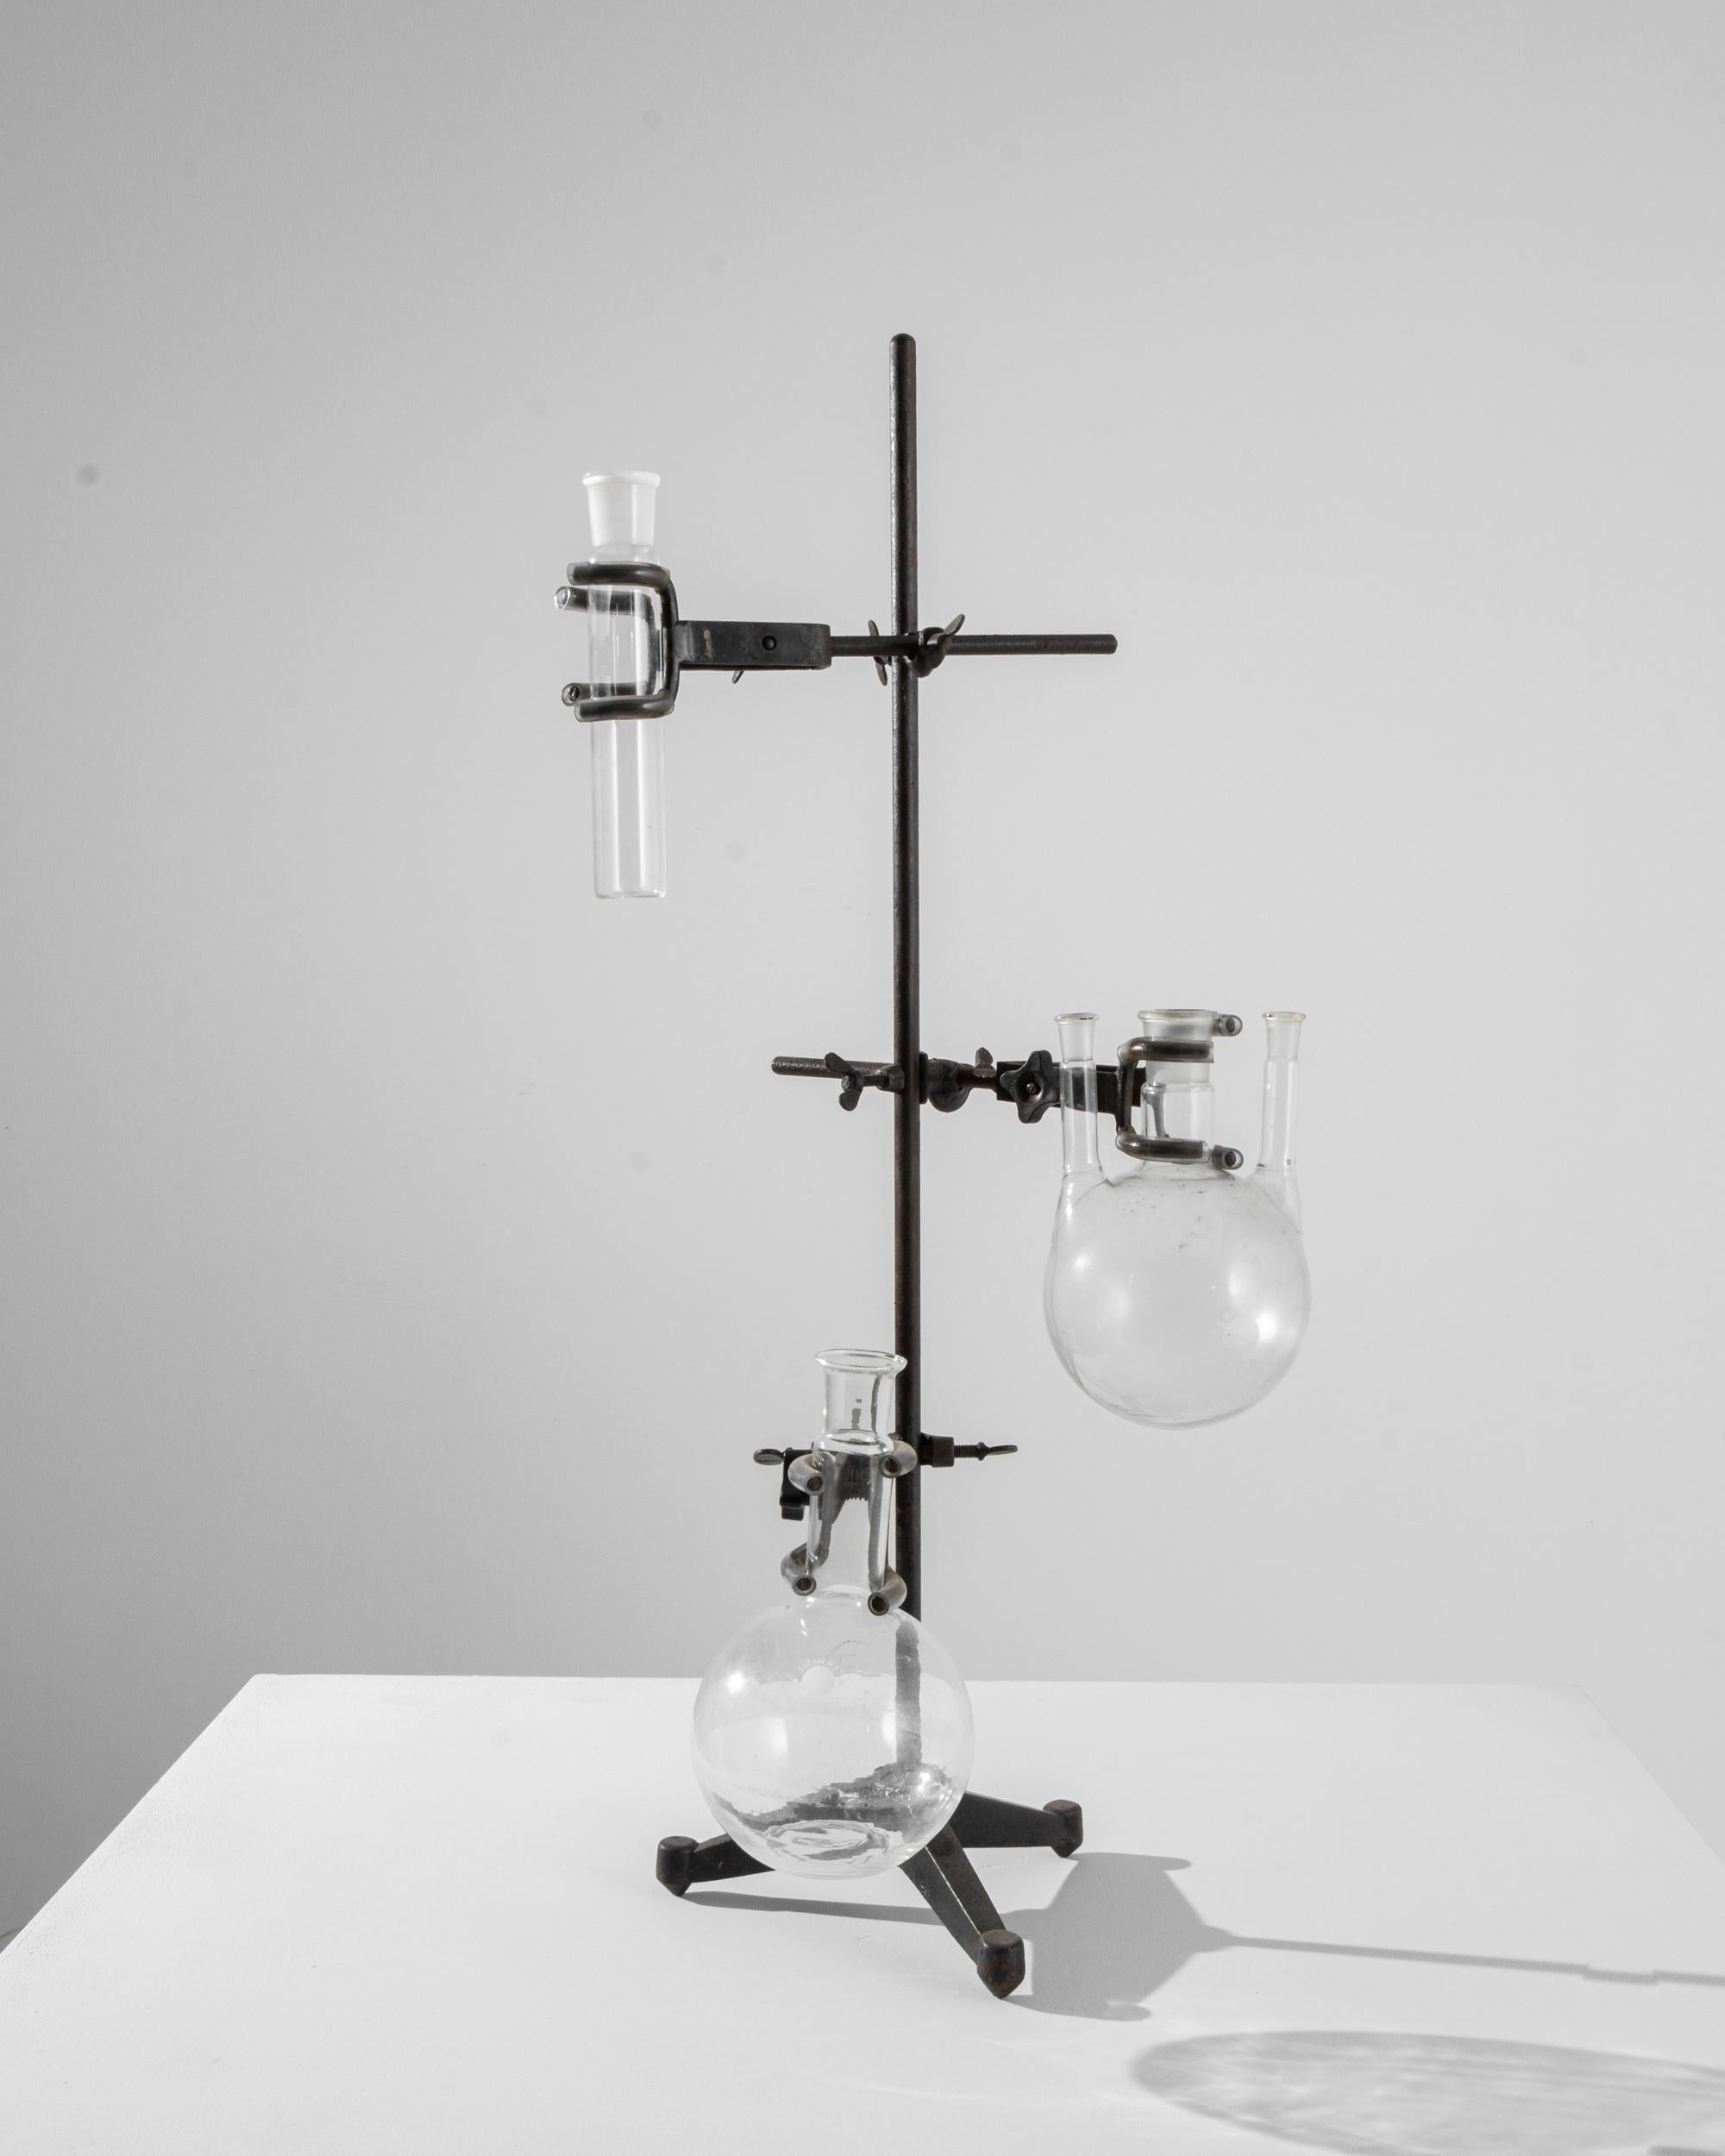 An intriguing and unique accent, this vintage lab-ware stand holds three round-bottomed flasks. Once used as a tool for conducting laboratory analysis or experimentation, the globe-like spheres glint with the crystal clarity of borosilicate. The